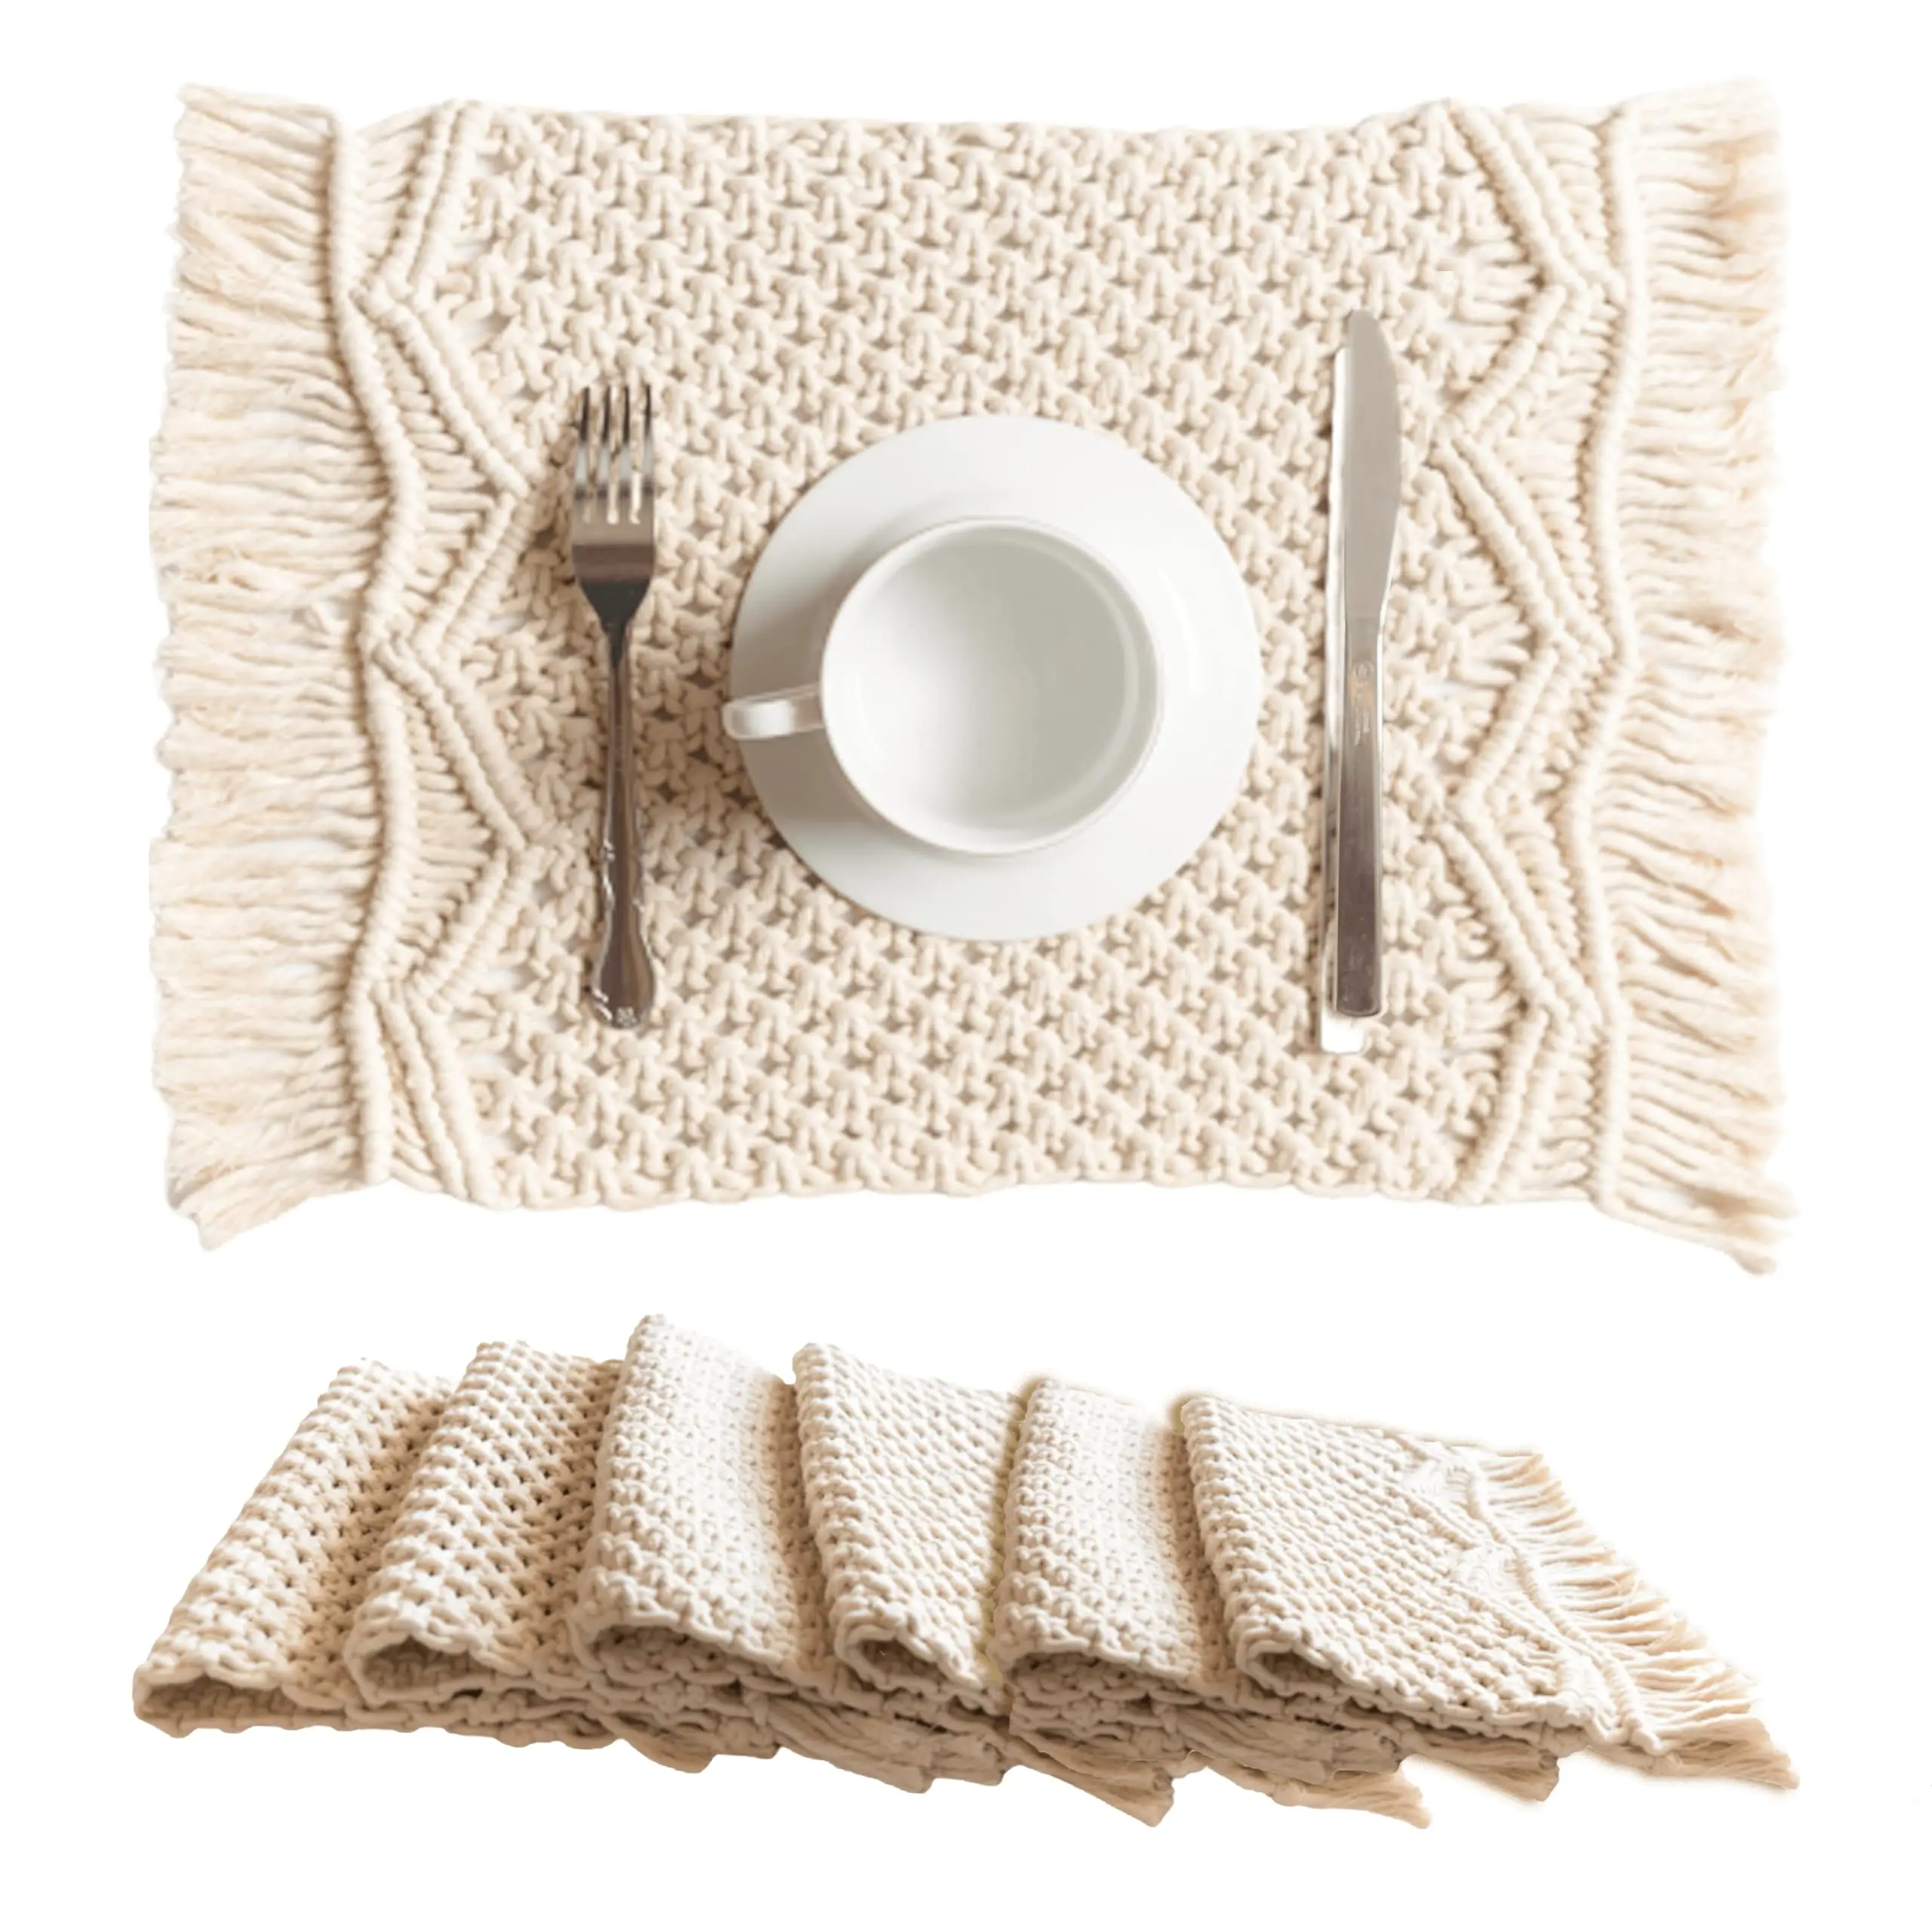 

Macrame Placemats Set of 4, Handmade Cotton Woven,Boho Placemats,Modern Farmhouse Fringe Placemat for Dining Table,Wedding,Rusti